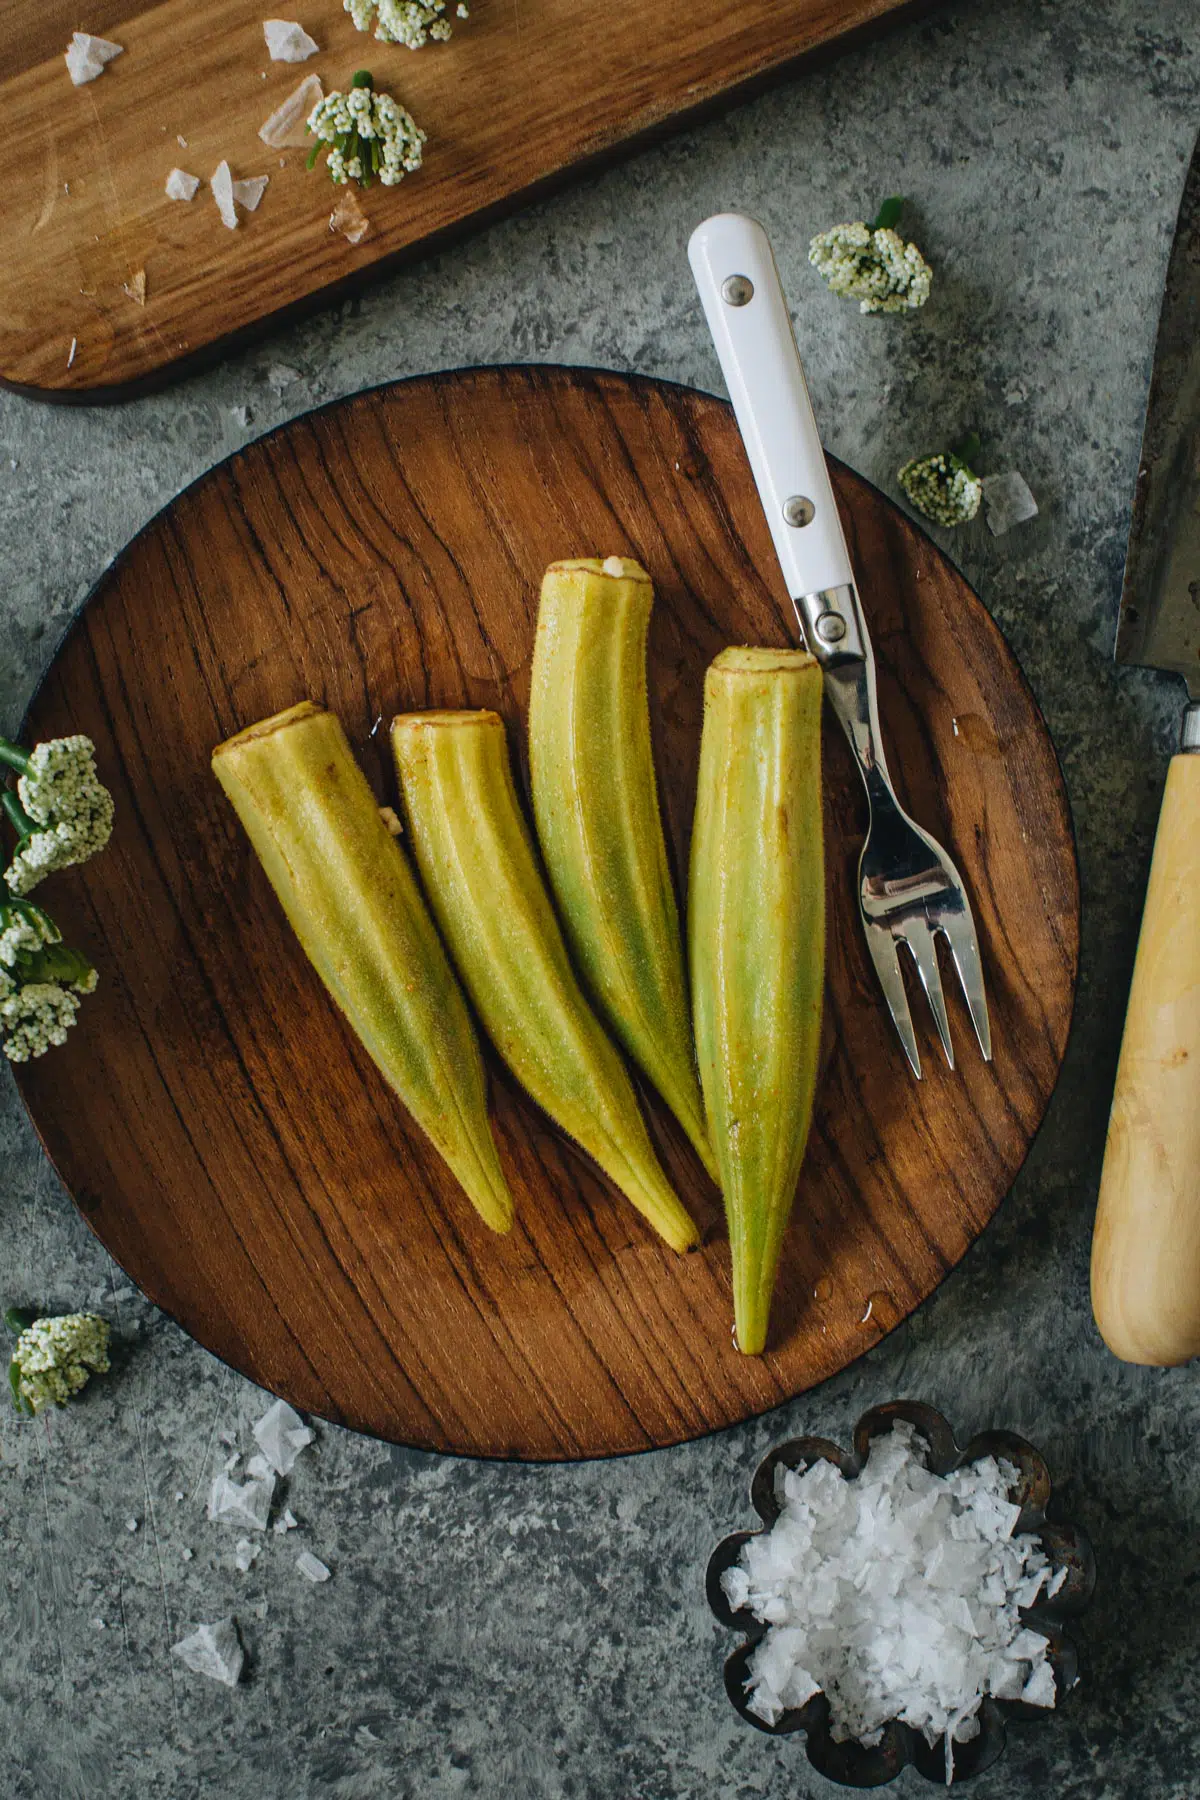 Pickled okra on a wooden plate with a white serving fork.